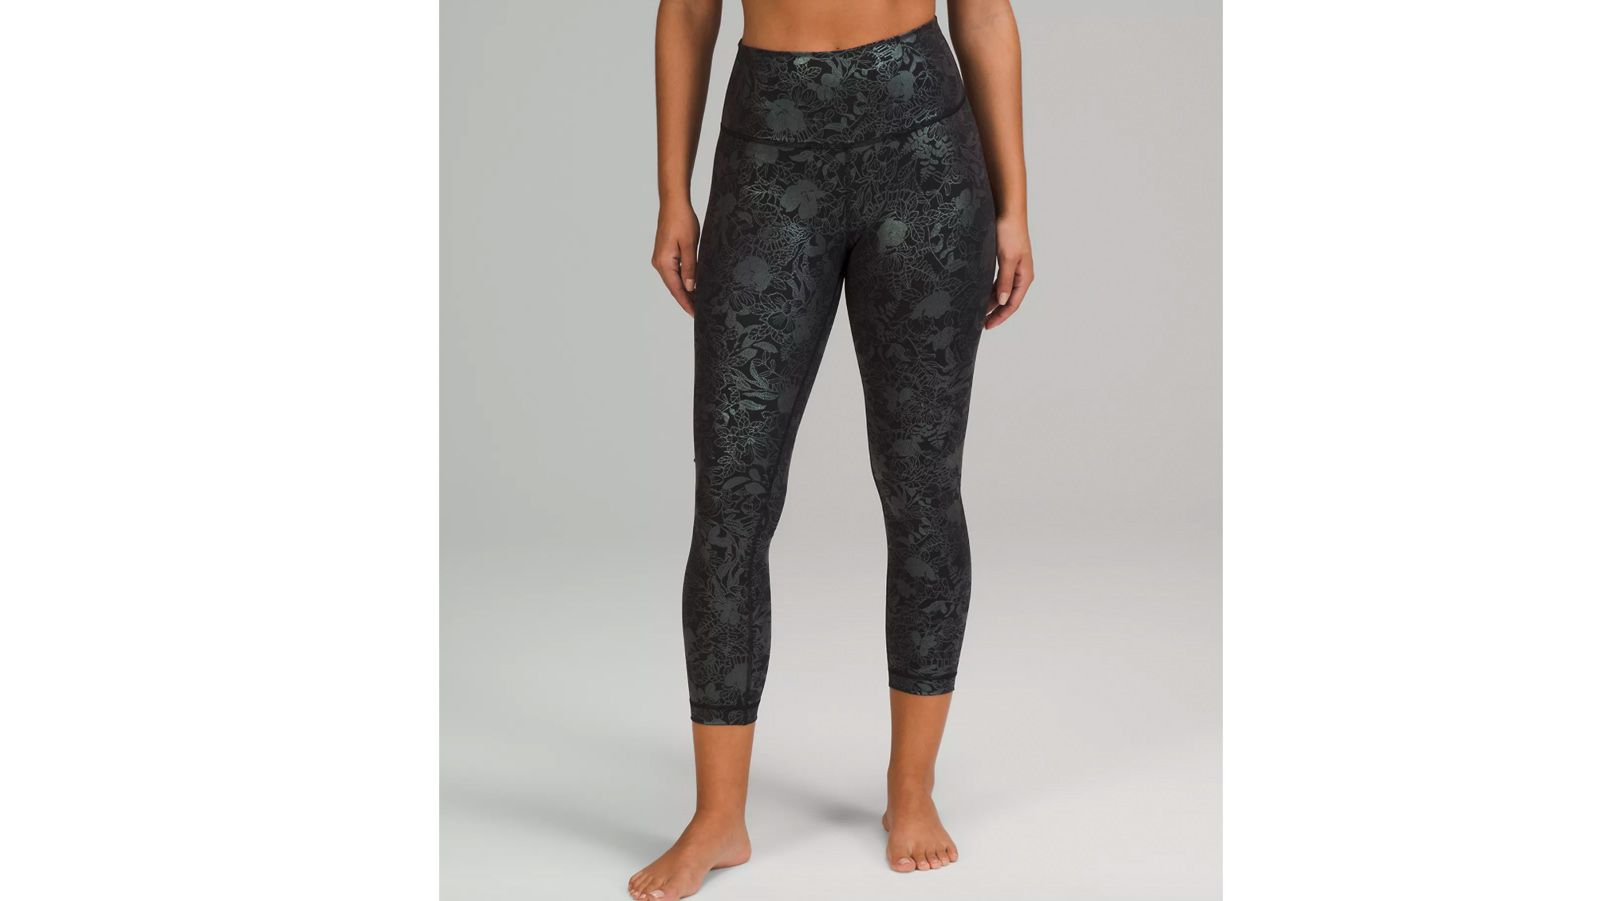 Lululemon Cyber Monday deals 2021: Yoga mats, Wunder Unders and more